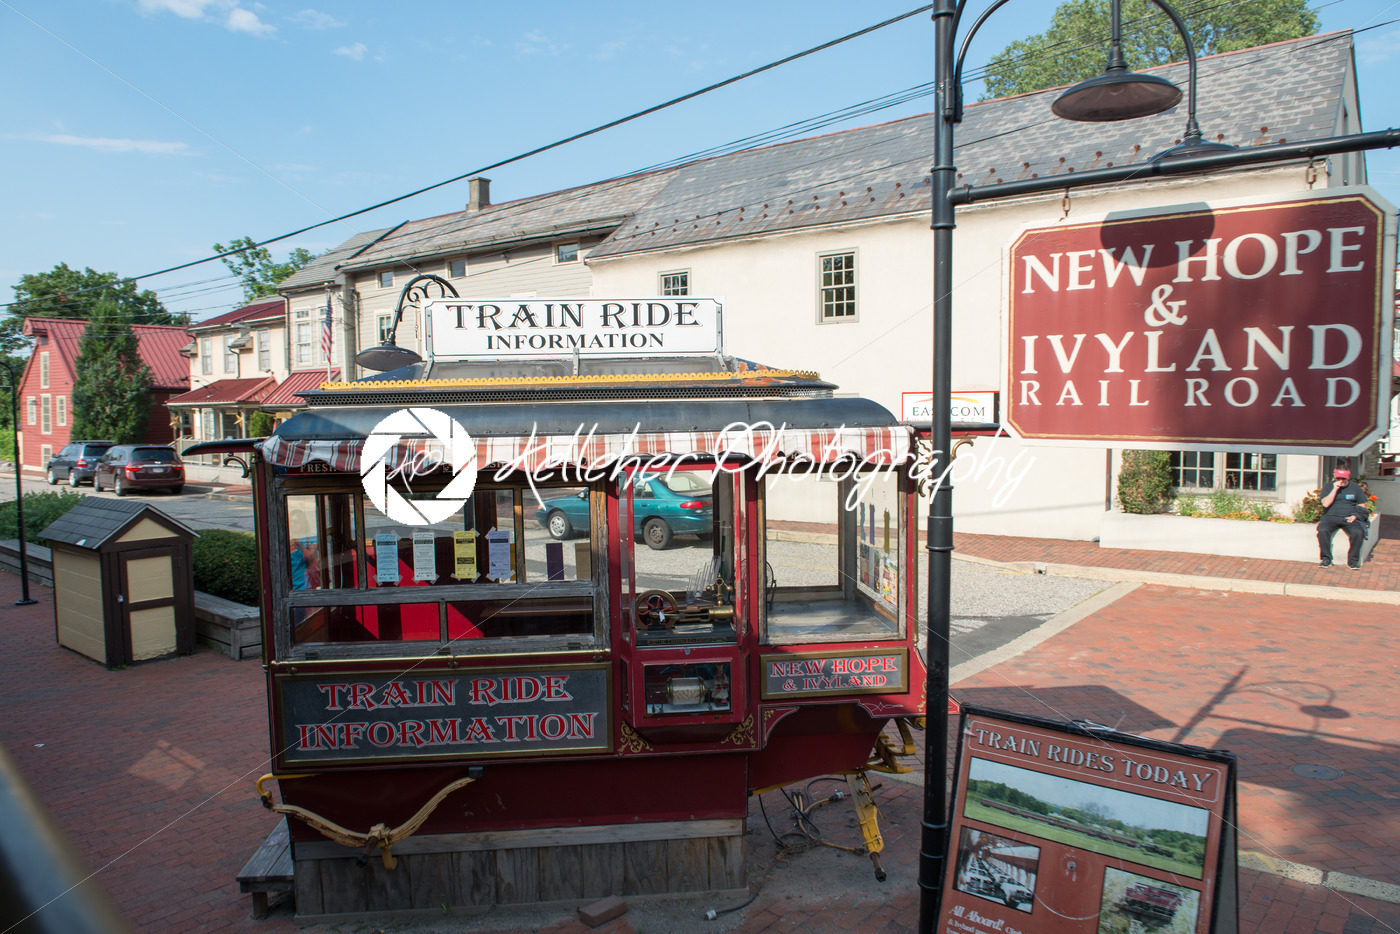 NEW HOPE, PA – AUGUST 11: The New Hope and Ivyland rail road is a heritage train line for visitors going on touristic excursions in Bucks County, Pennsylvania on August 11, 2013 - Kelleher Photography Store